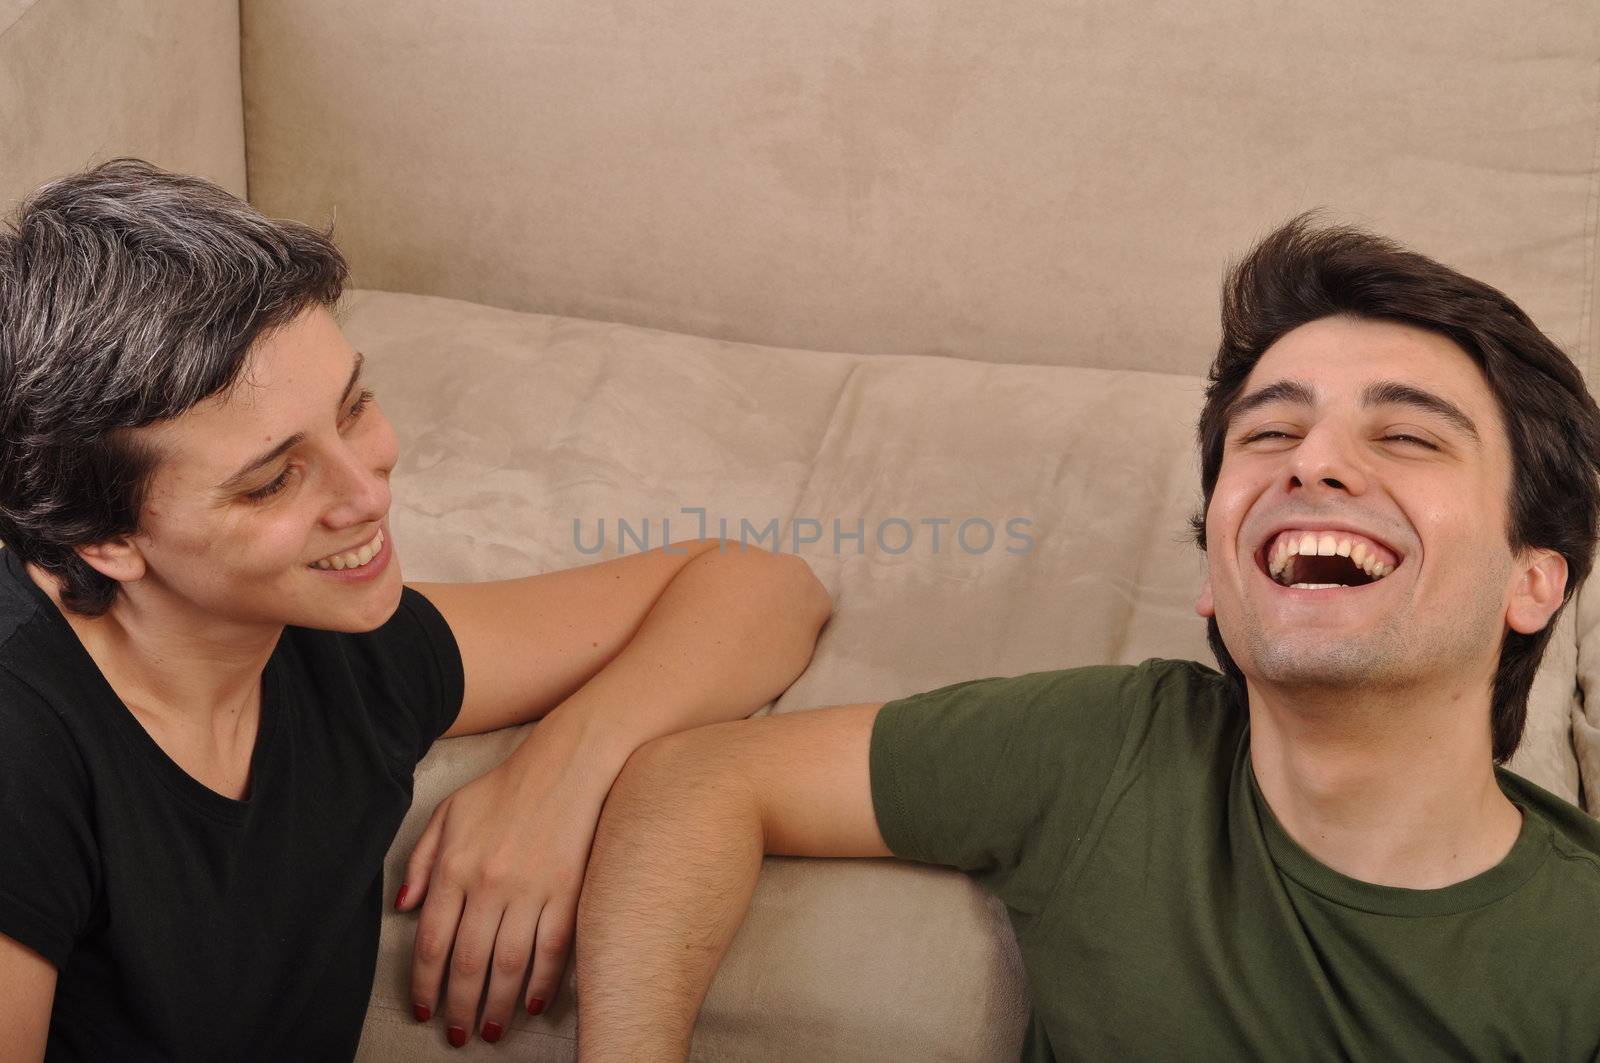 friendship between sister and brother lying and laughing on the floor next to couch